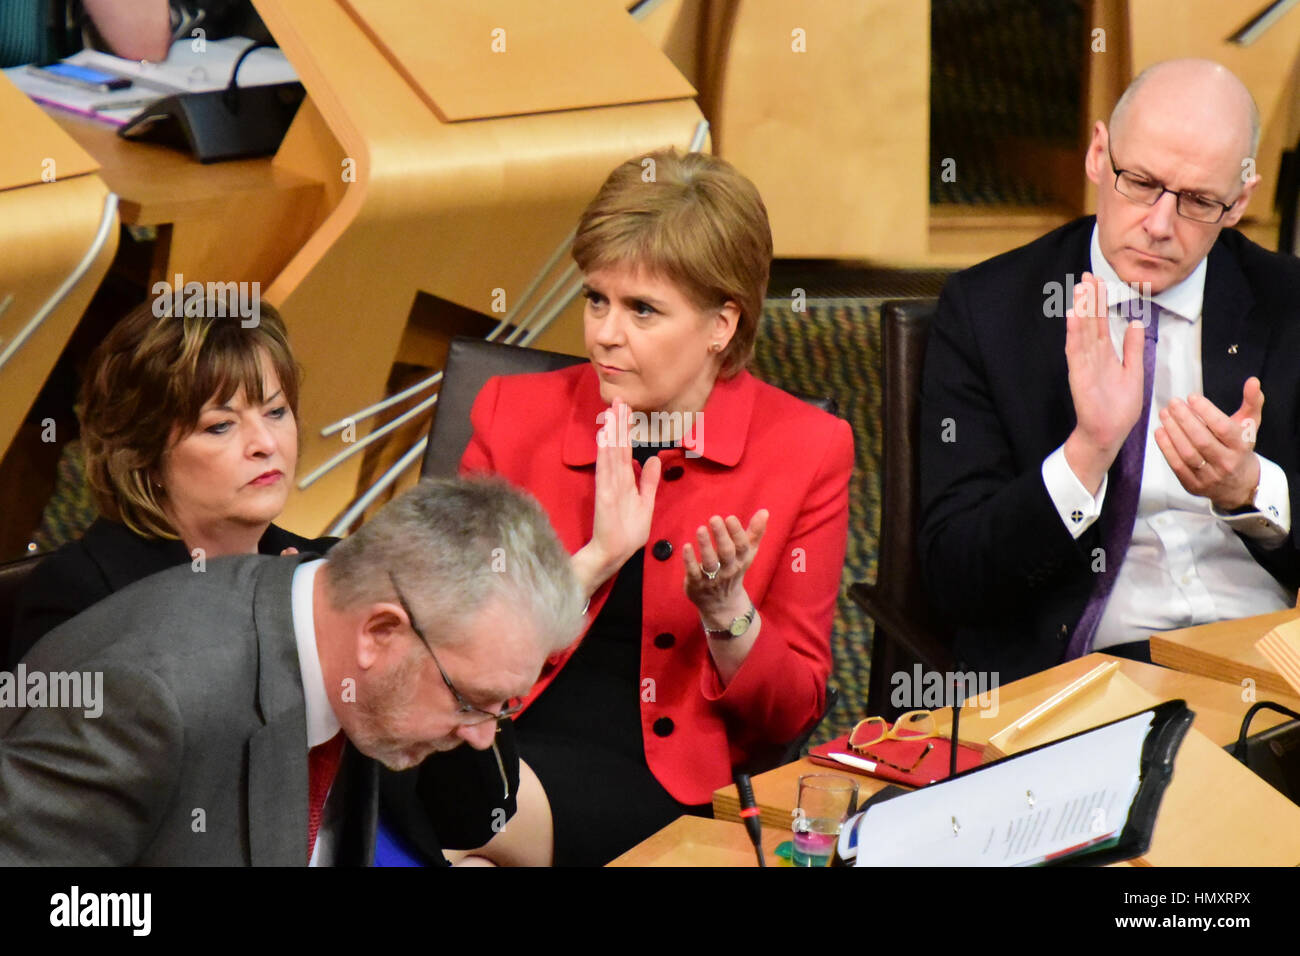 Edinburgh, UK. 7th Feb, 2017. First Minister Nicola Sturgeon applauds Scottish Brexit Minister Michael Russell (2nd L) as he sits down after introducing a Scottish Government debate in the Scottish Parliament opposing the triggering of Article 50, Credit: Ken Jack/Alamy Live News Stock Photo